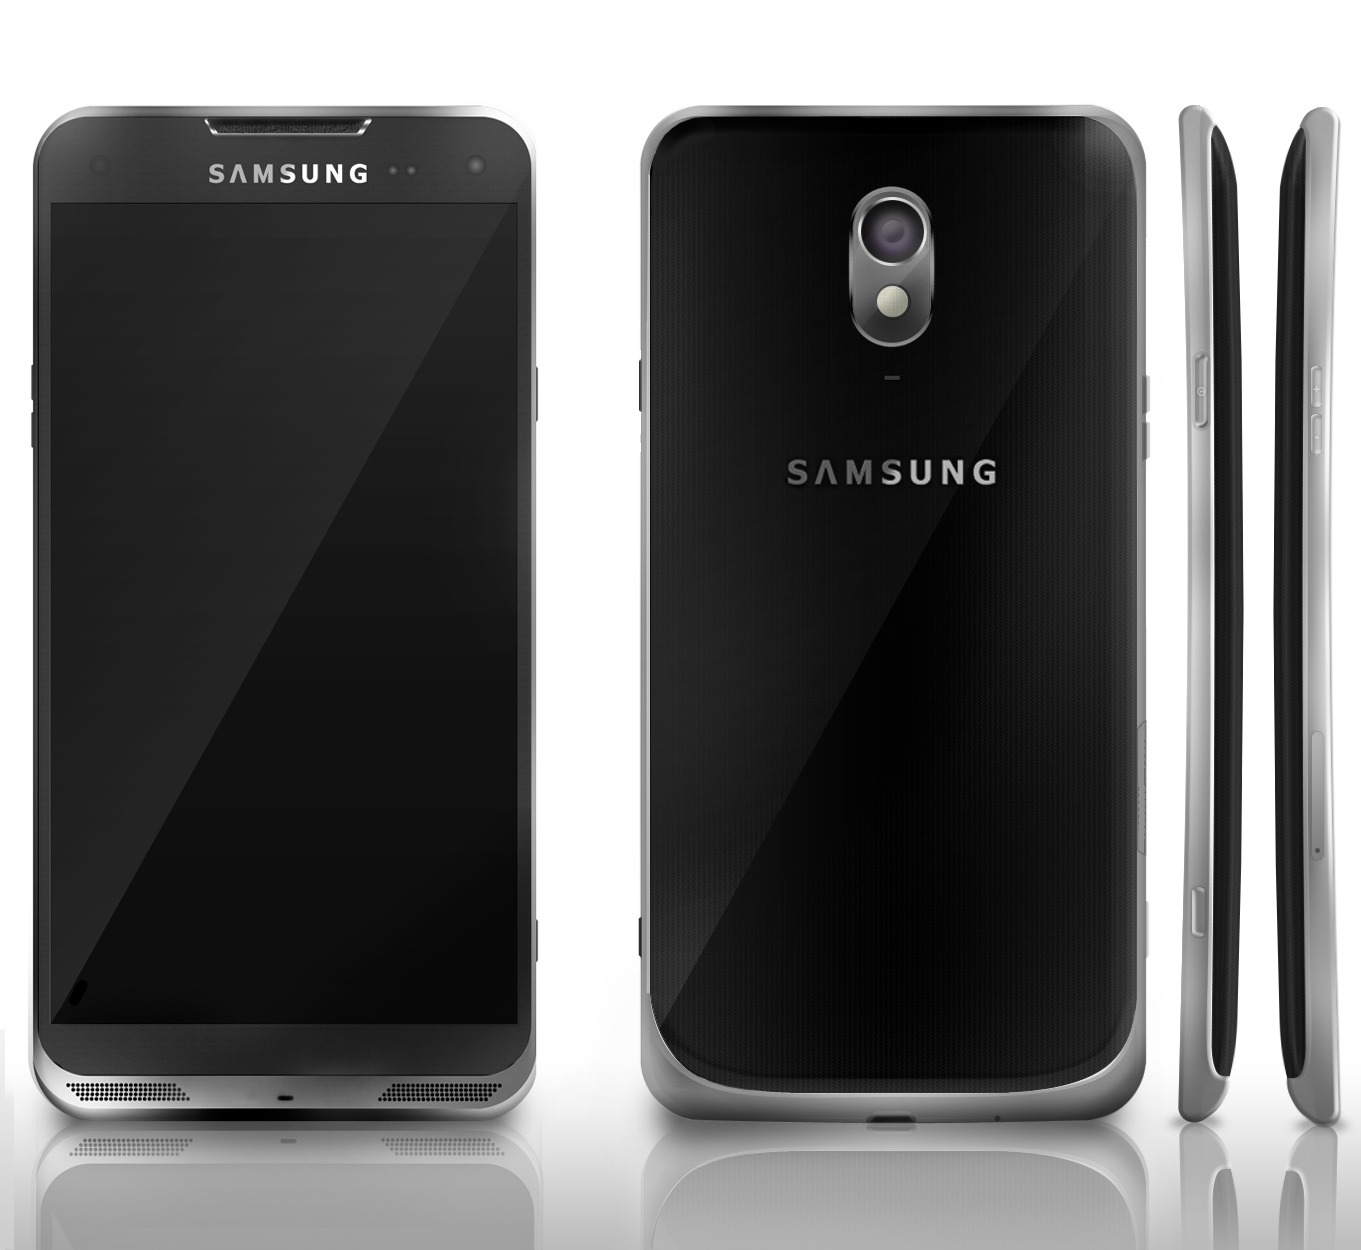 The Samsung Galaxy S IV will be announced at an event on March 14th in ...